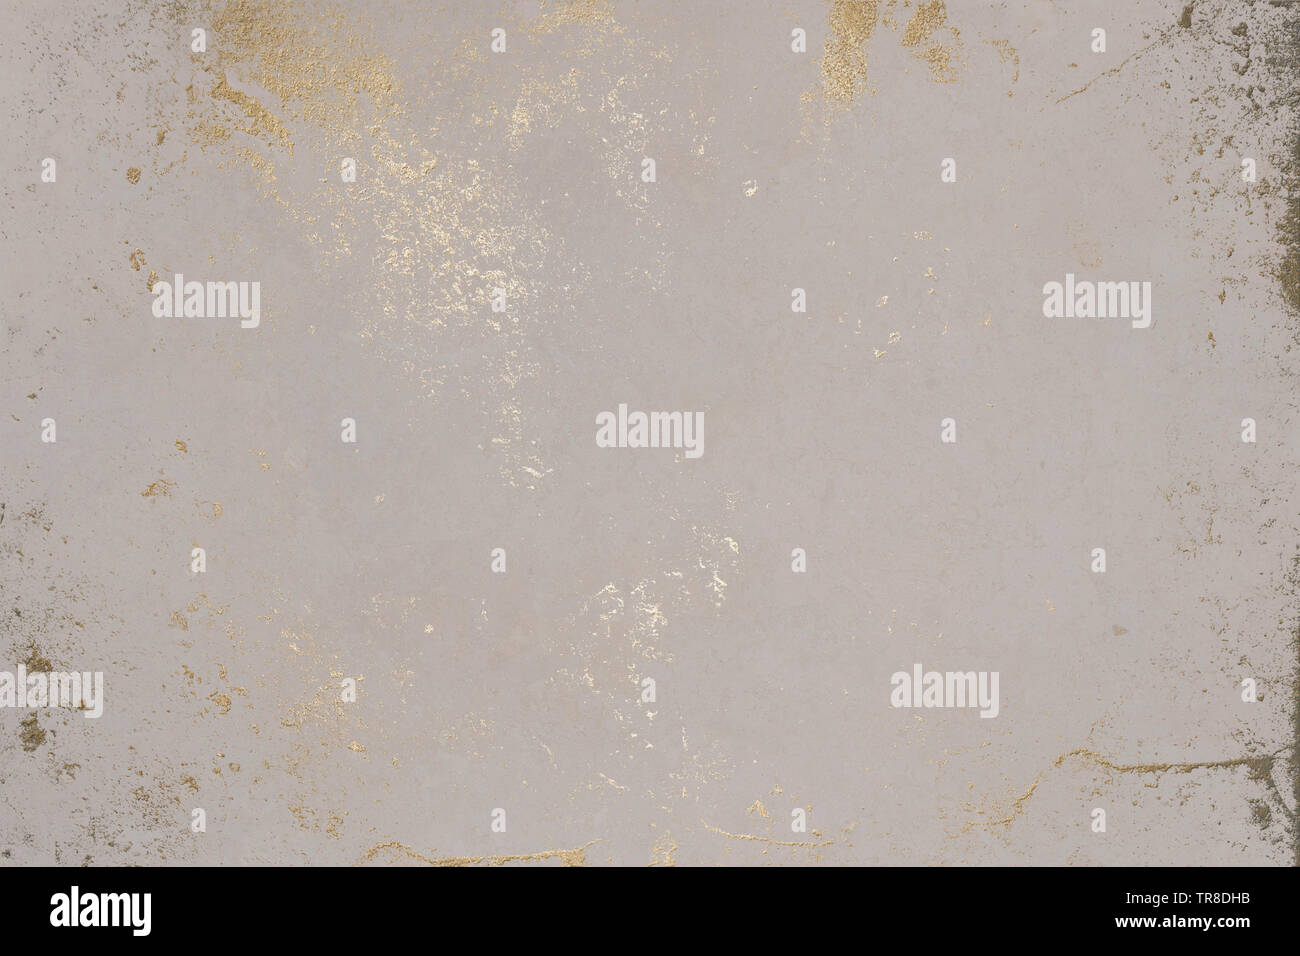 Luxury vintage texture with gold splash. Alpaca background. Luxury grunge texture with effect overlay gold. High quality print. Stock Photo